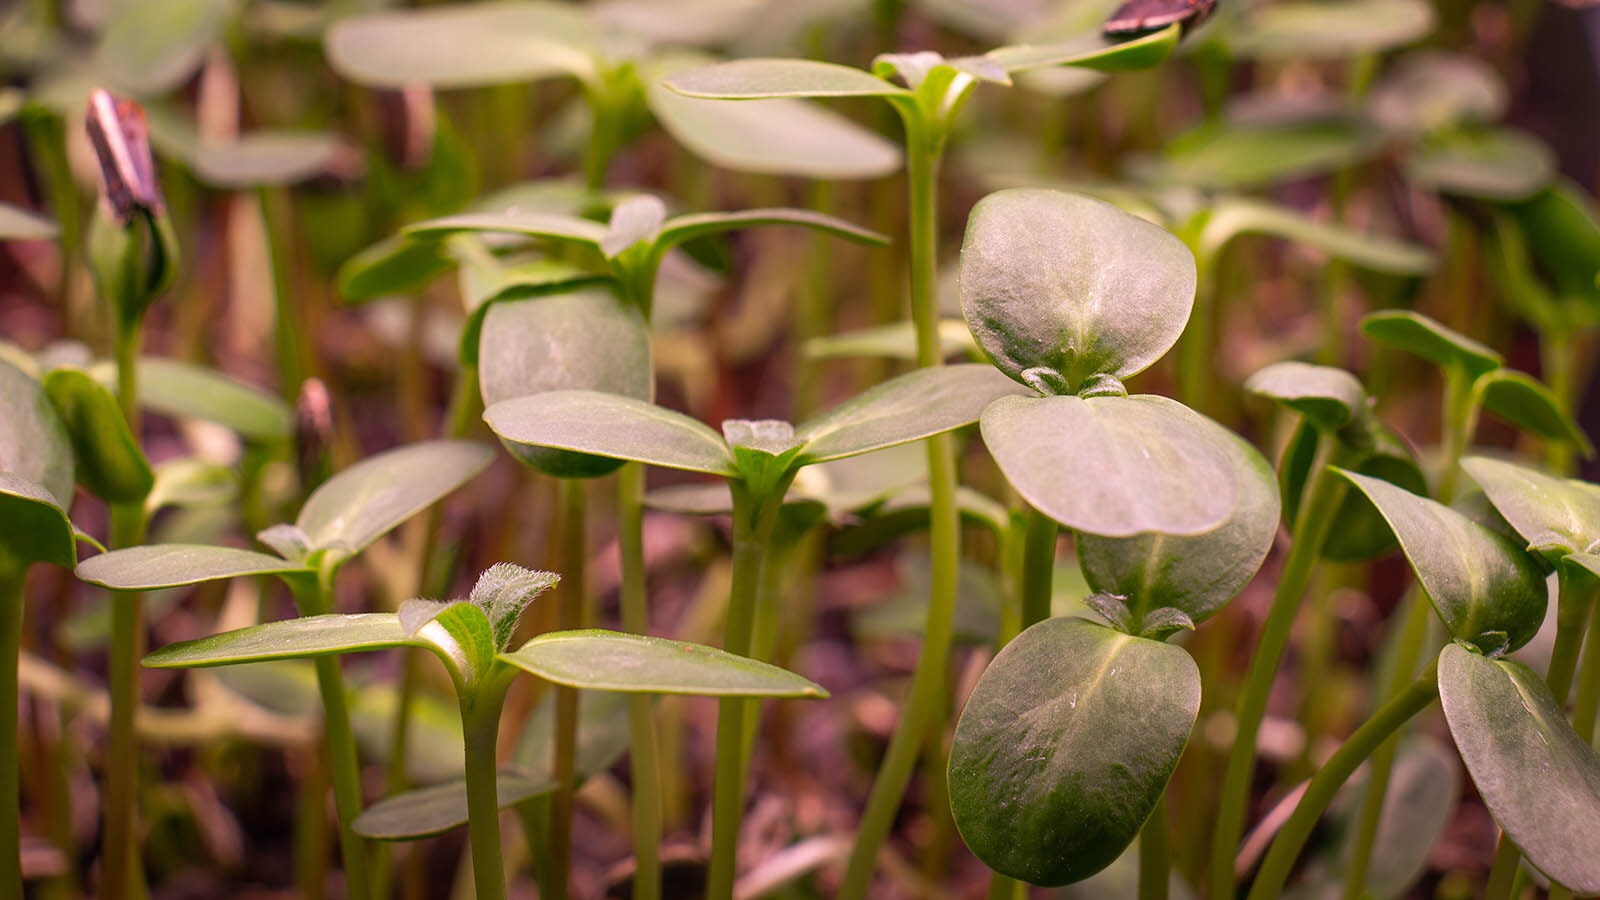 Along with many varieties of mushrooms, Webster Mycology also raises microgreens, like these sunflower microgreens.